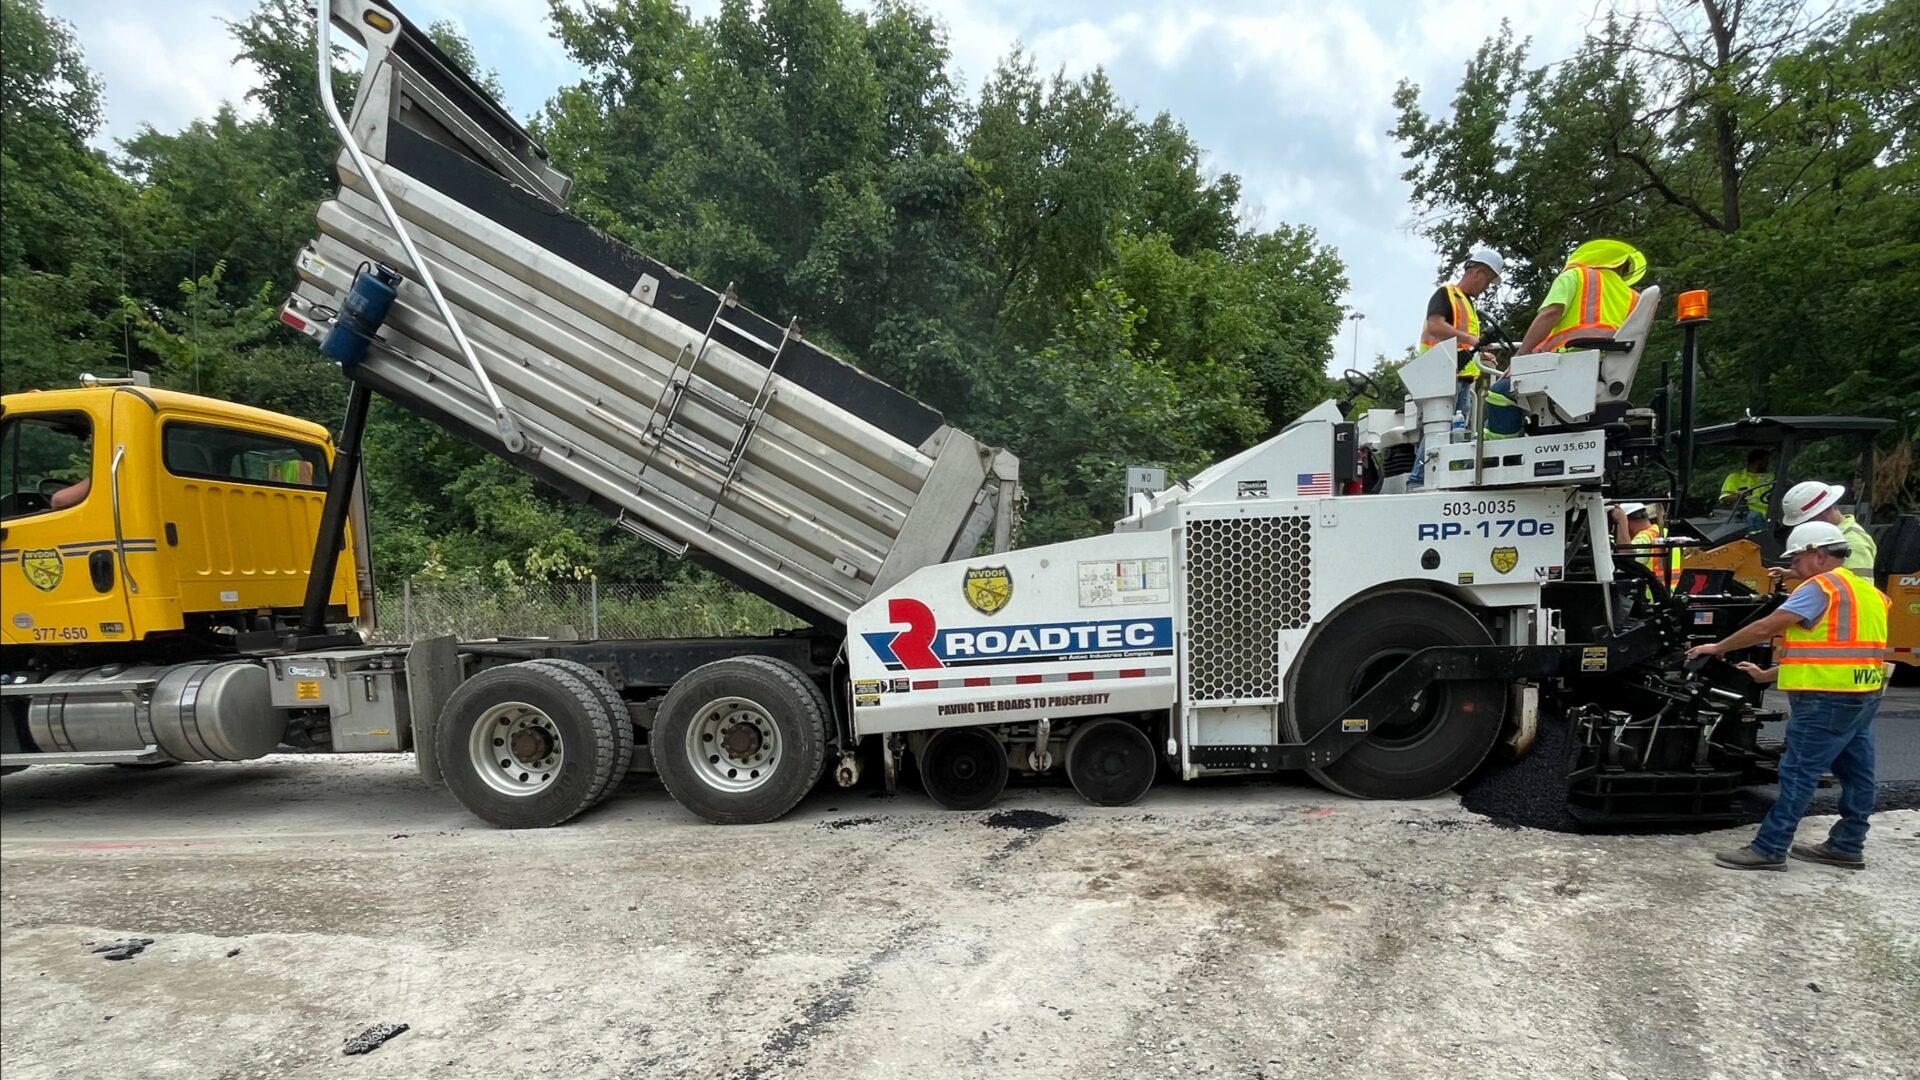 A yellow truck dumps materials into a white pavement machine. The machine has the word "Roadtec" written across it.